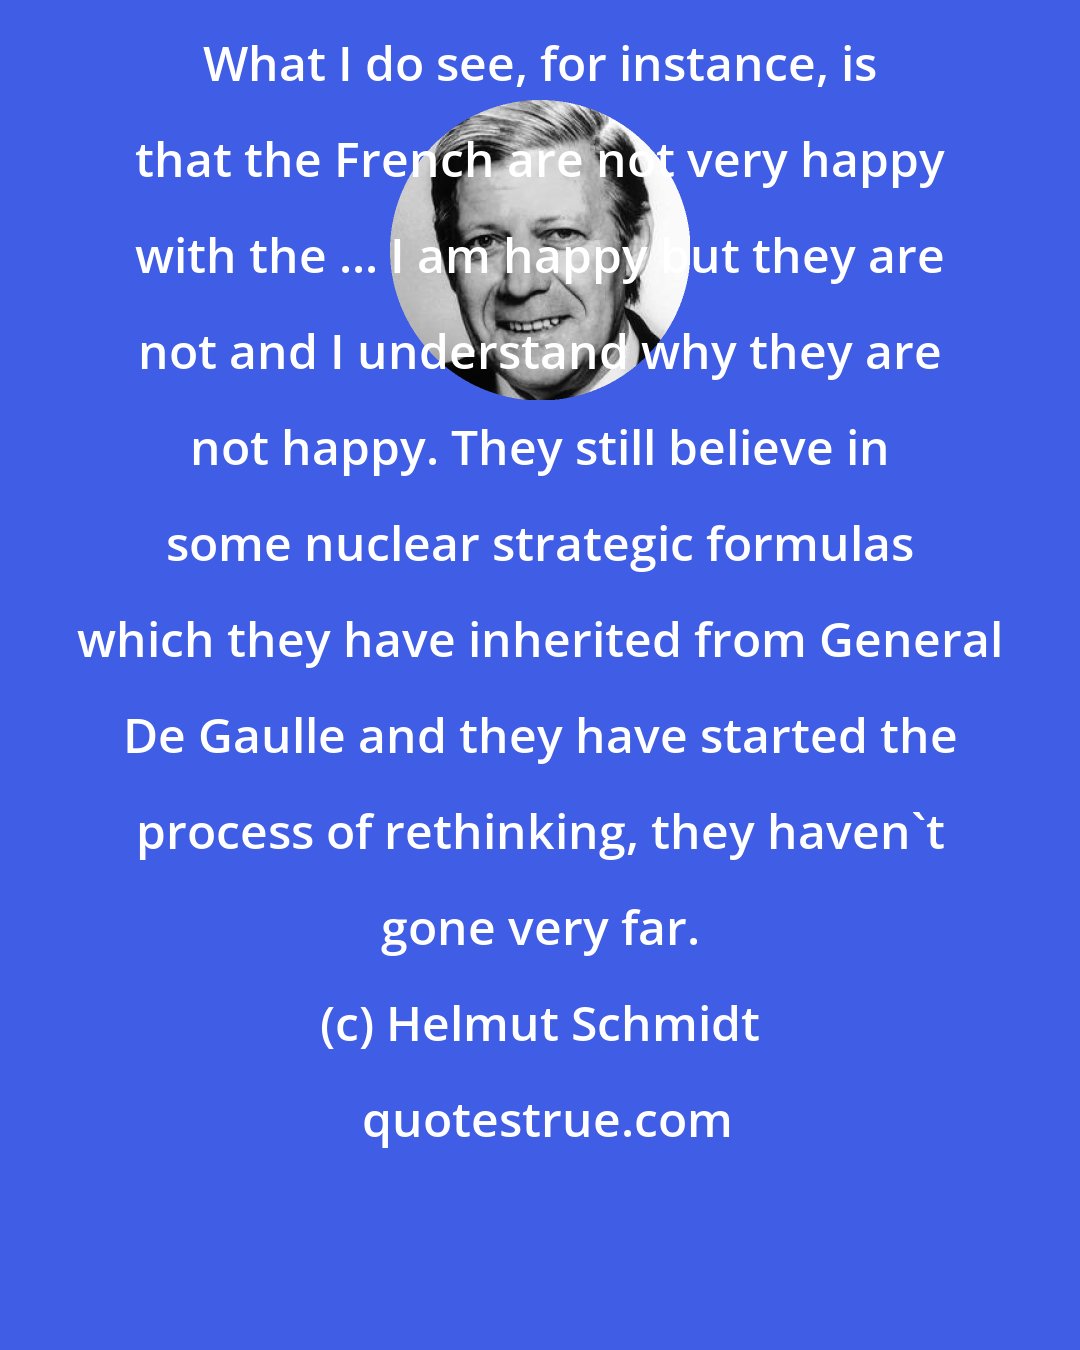 Helmut Schmidt: What I do see, for instance, is that the French are not very happy with the ... I am happy but they are not and I understand why they are not happy. They still believe in some nuclear strategic formulas which they have inherited from General De Gaulle and they have started the process of rethinking, they haven't gone very far.